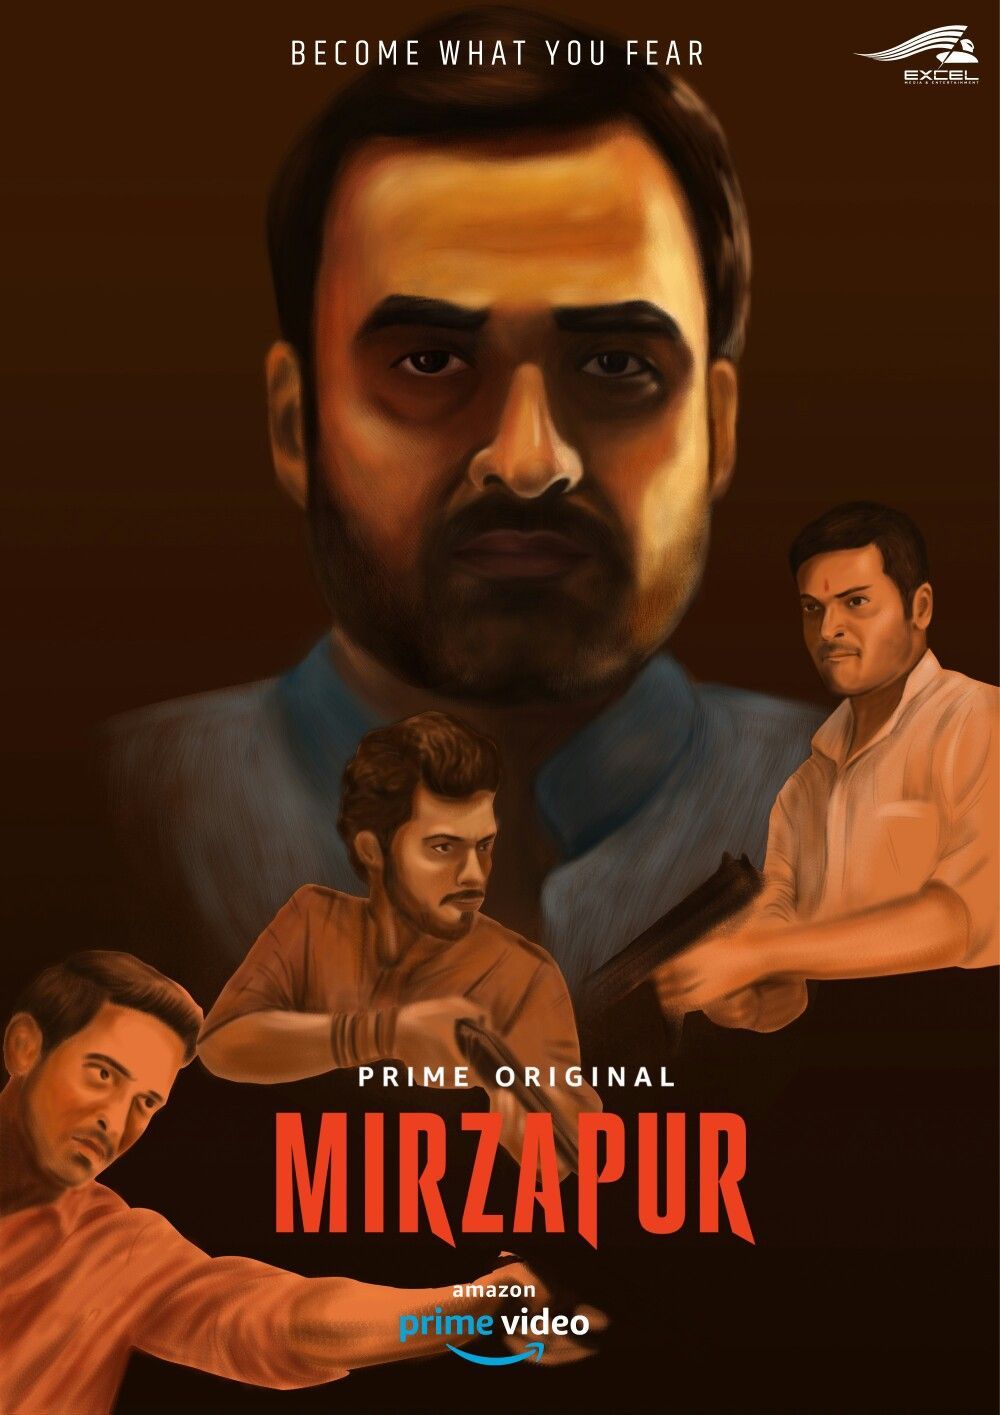 This is a digital poster made by me for upcoming series Mirzapur. Upcoming series, Amazon prime video, Talenthouse